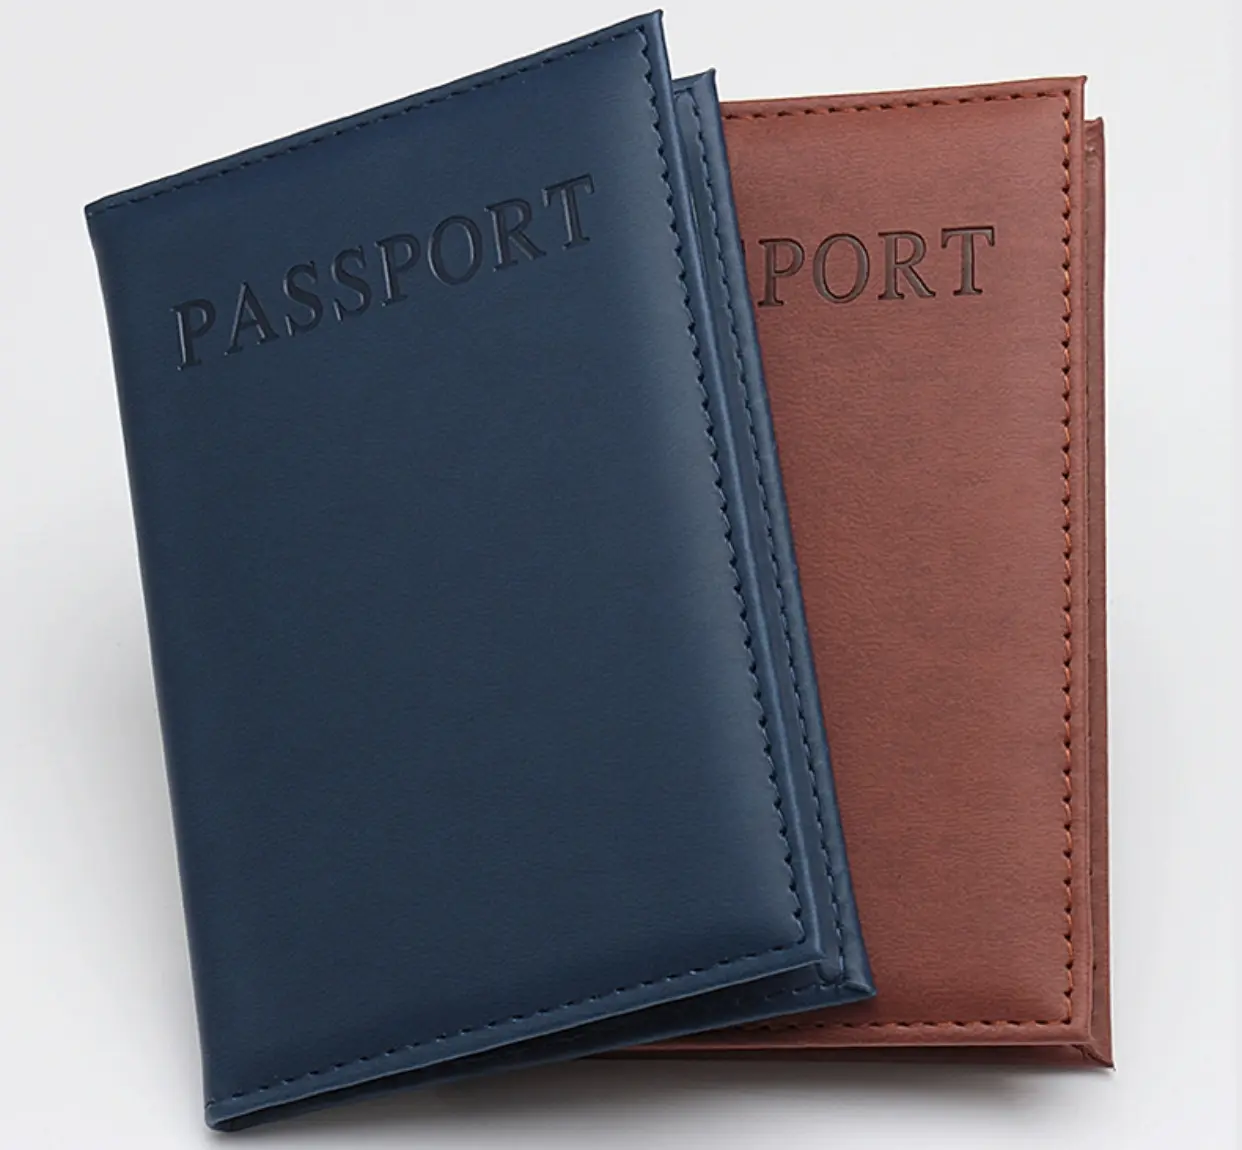 Passport Wallets Card Holders Cover Case Protector Pu Leather Travel Purse Wallet Bag Passport Id Cover Case